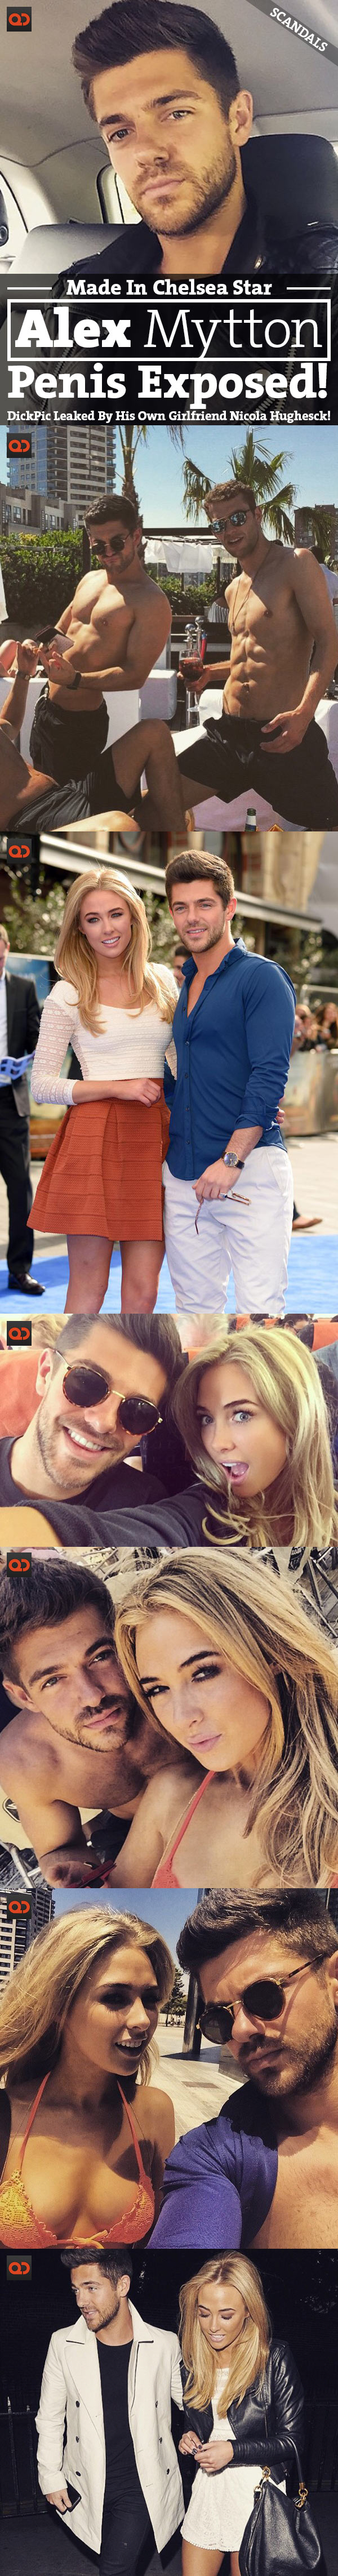 QC Scandals: Alex Mytton’s Penis Exposed! Pic Leaked By His Own Girlfriend Nicola Hughes On Instagram